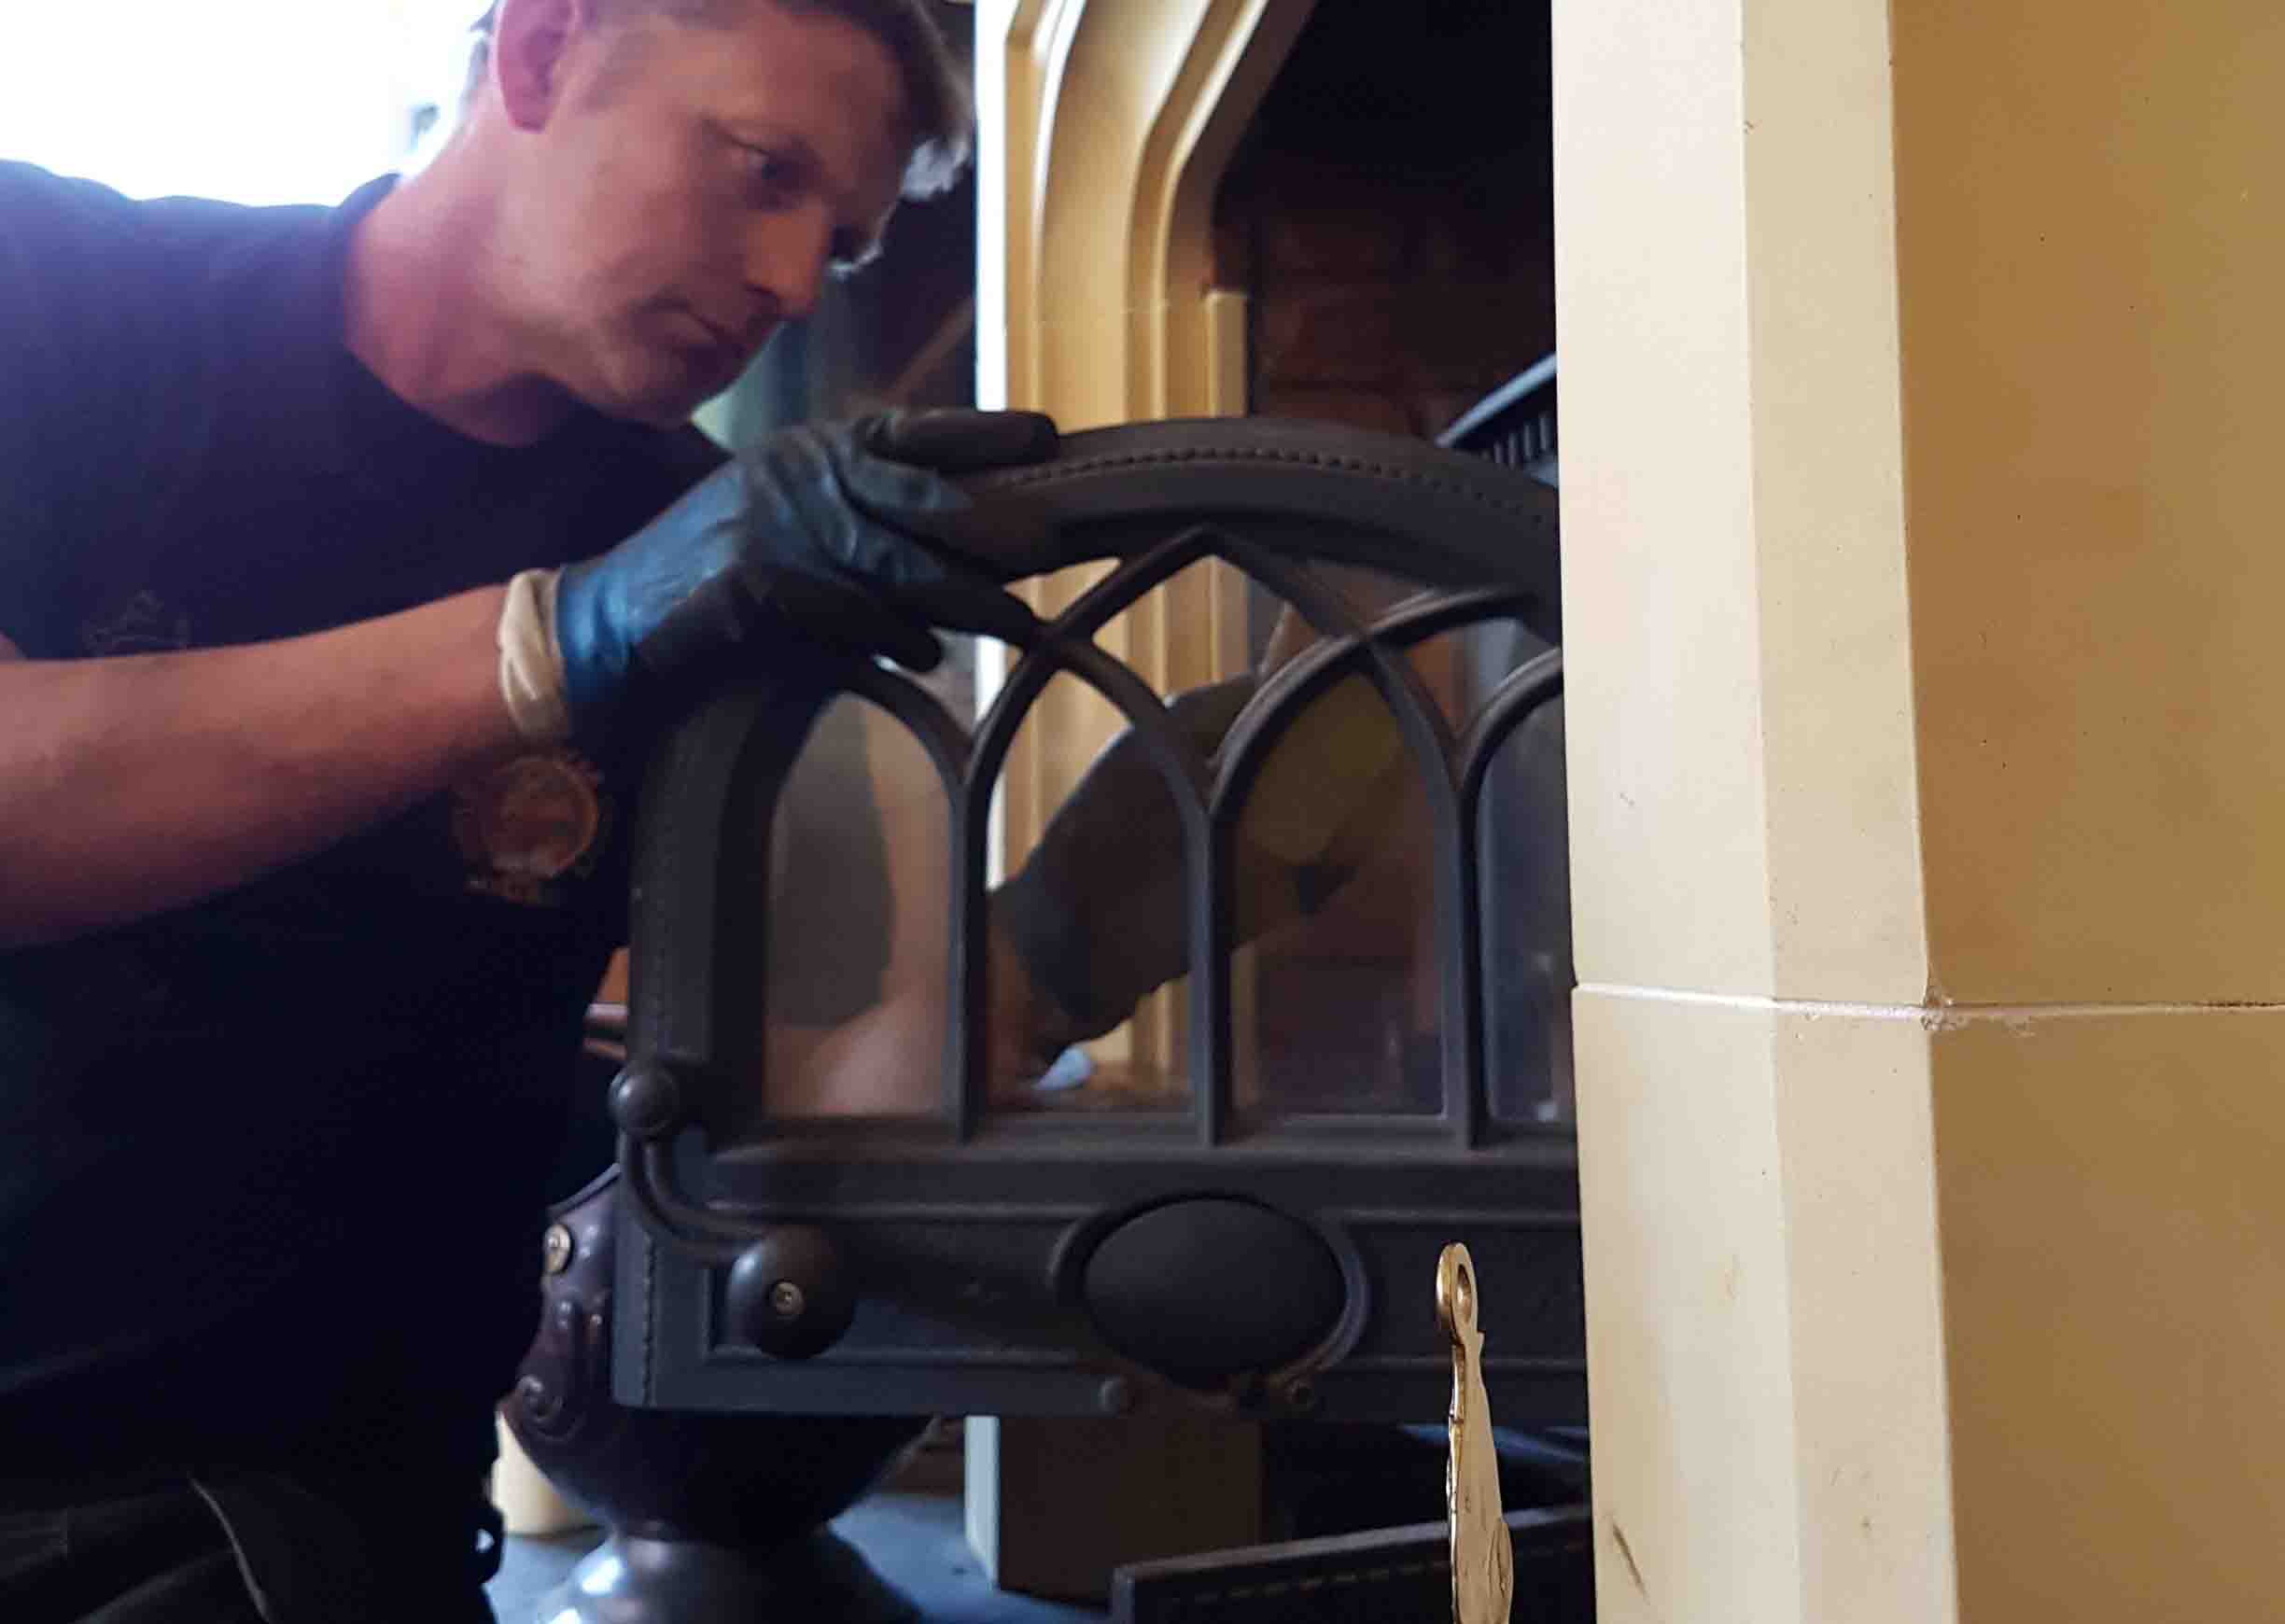 A Chimney Sweep stove service